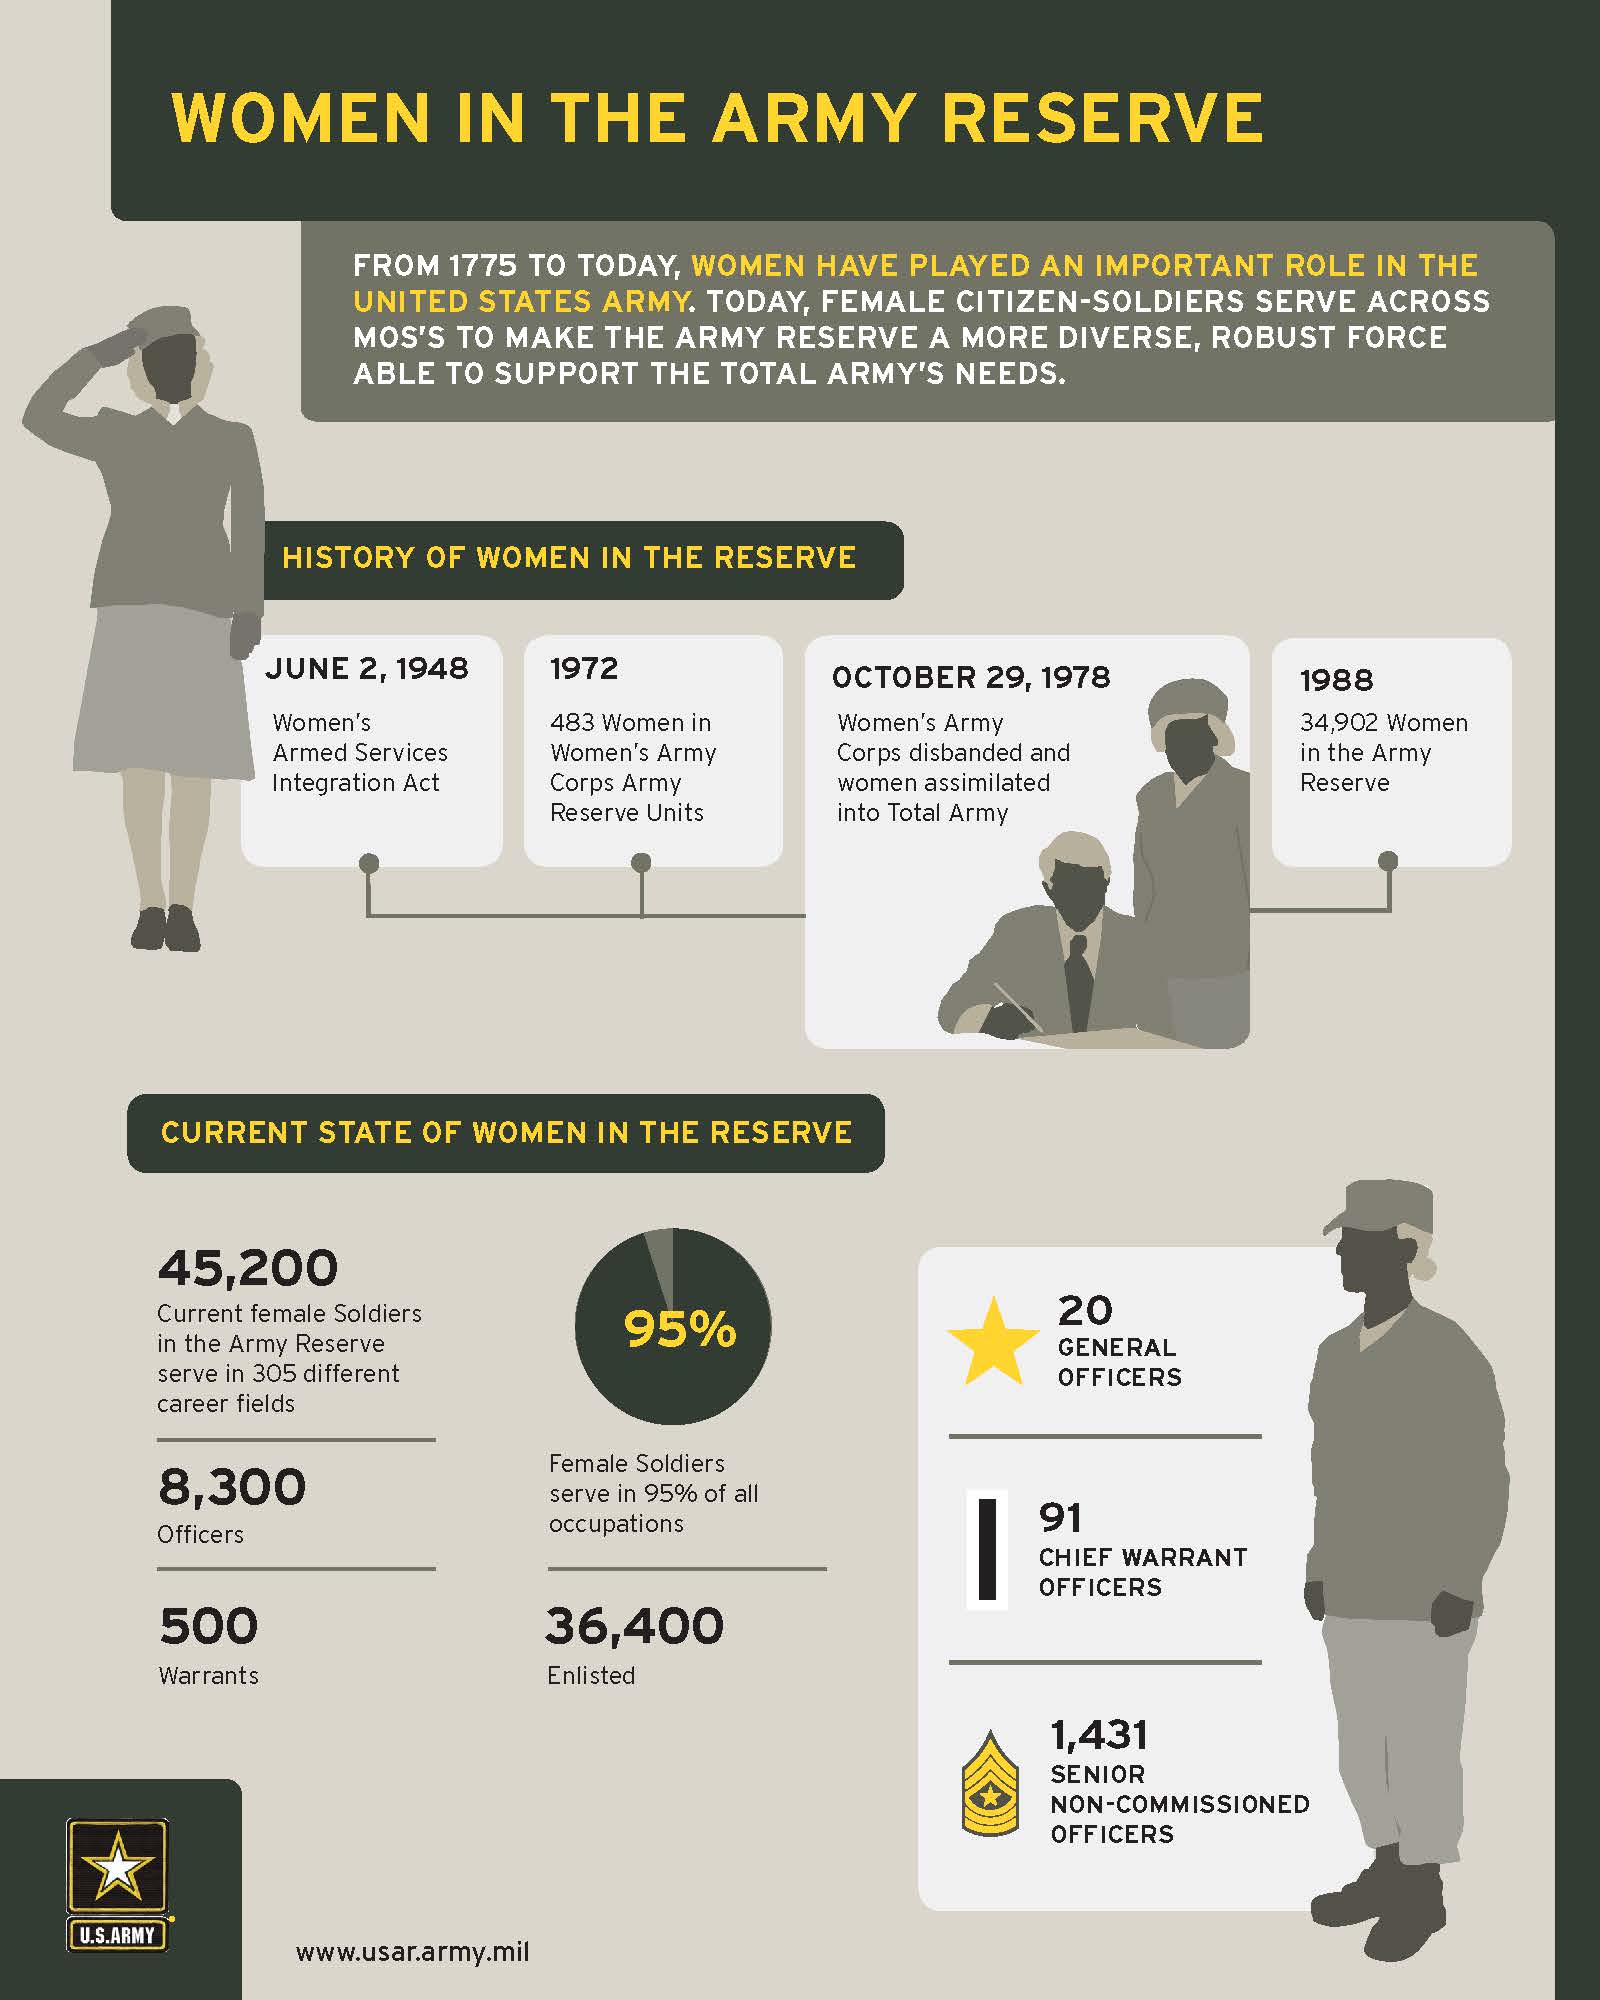 Women in the Army Reserve